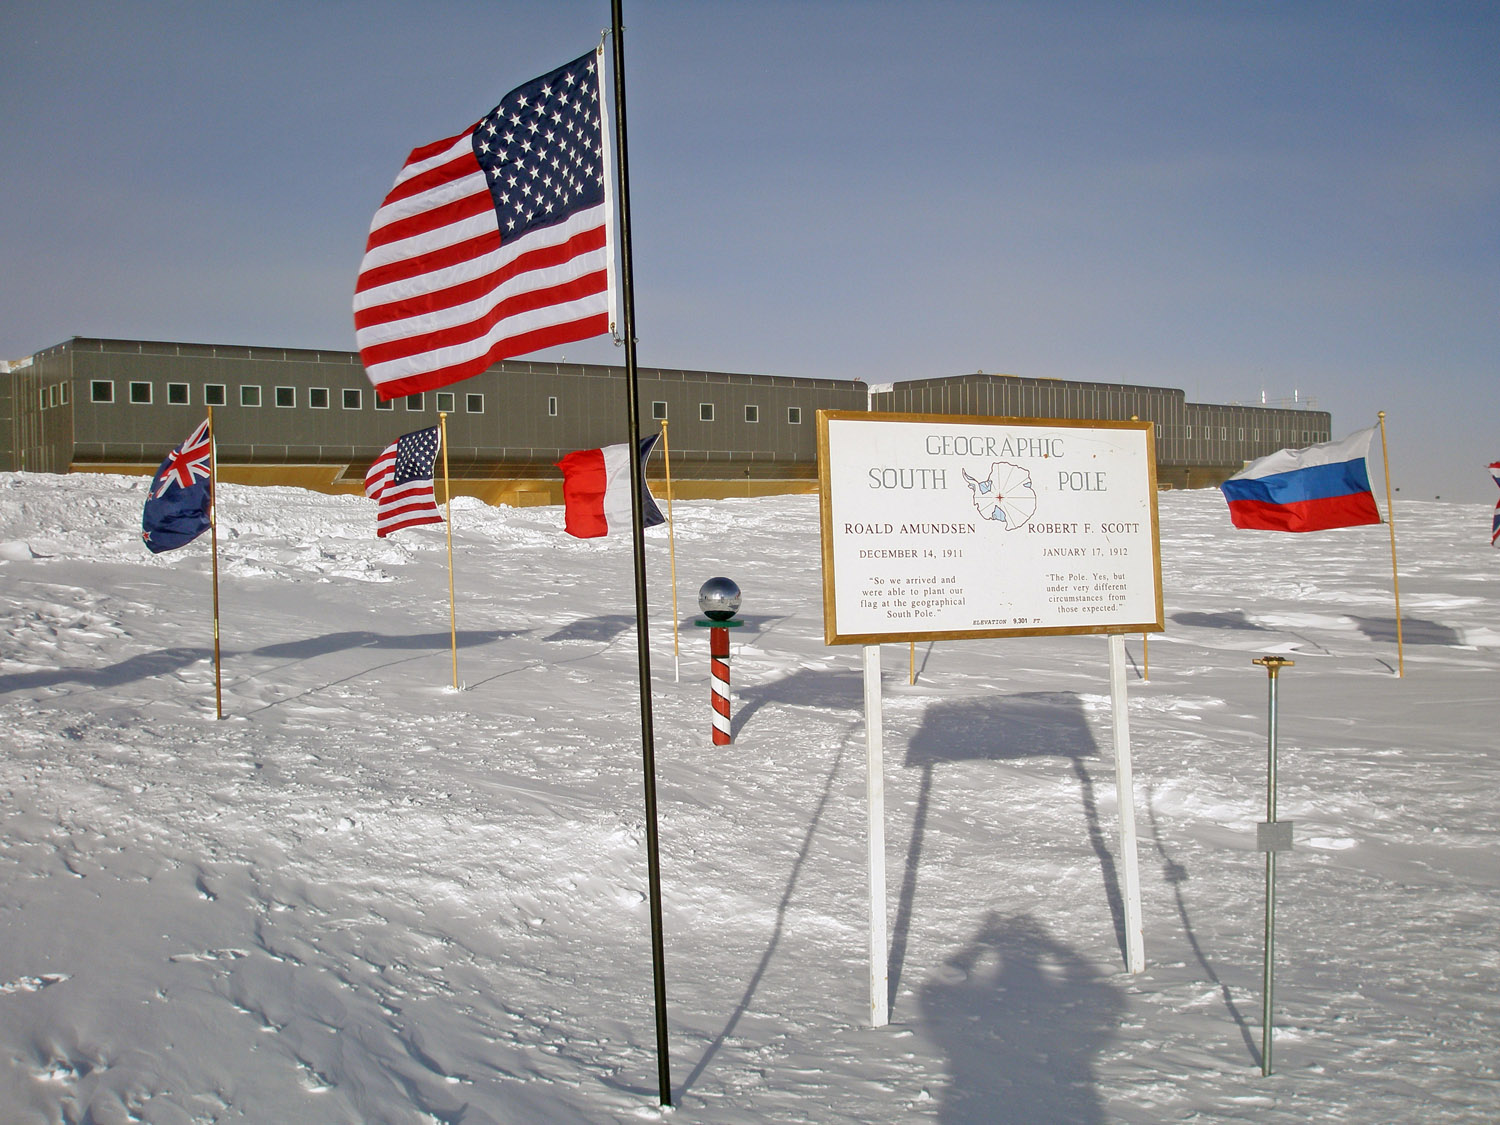 South Pole Station and - Geographic South Pole - 2